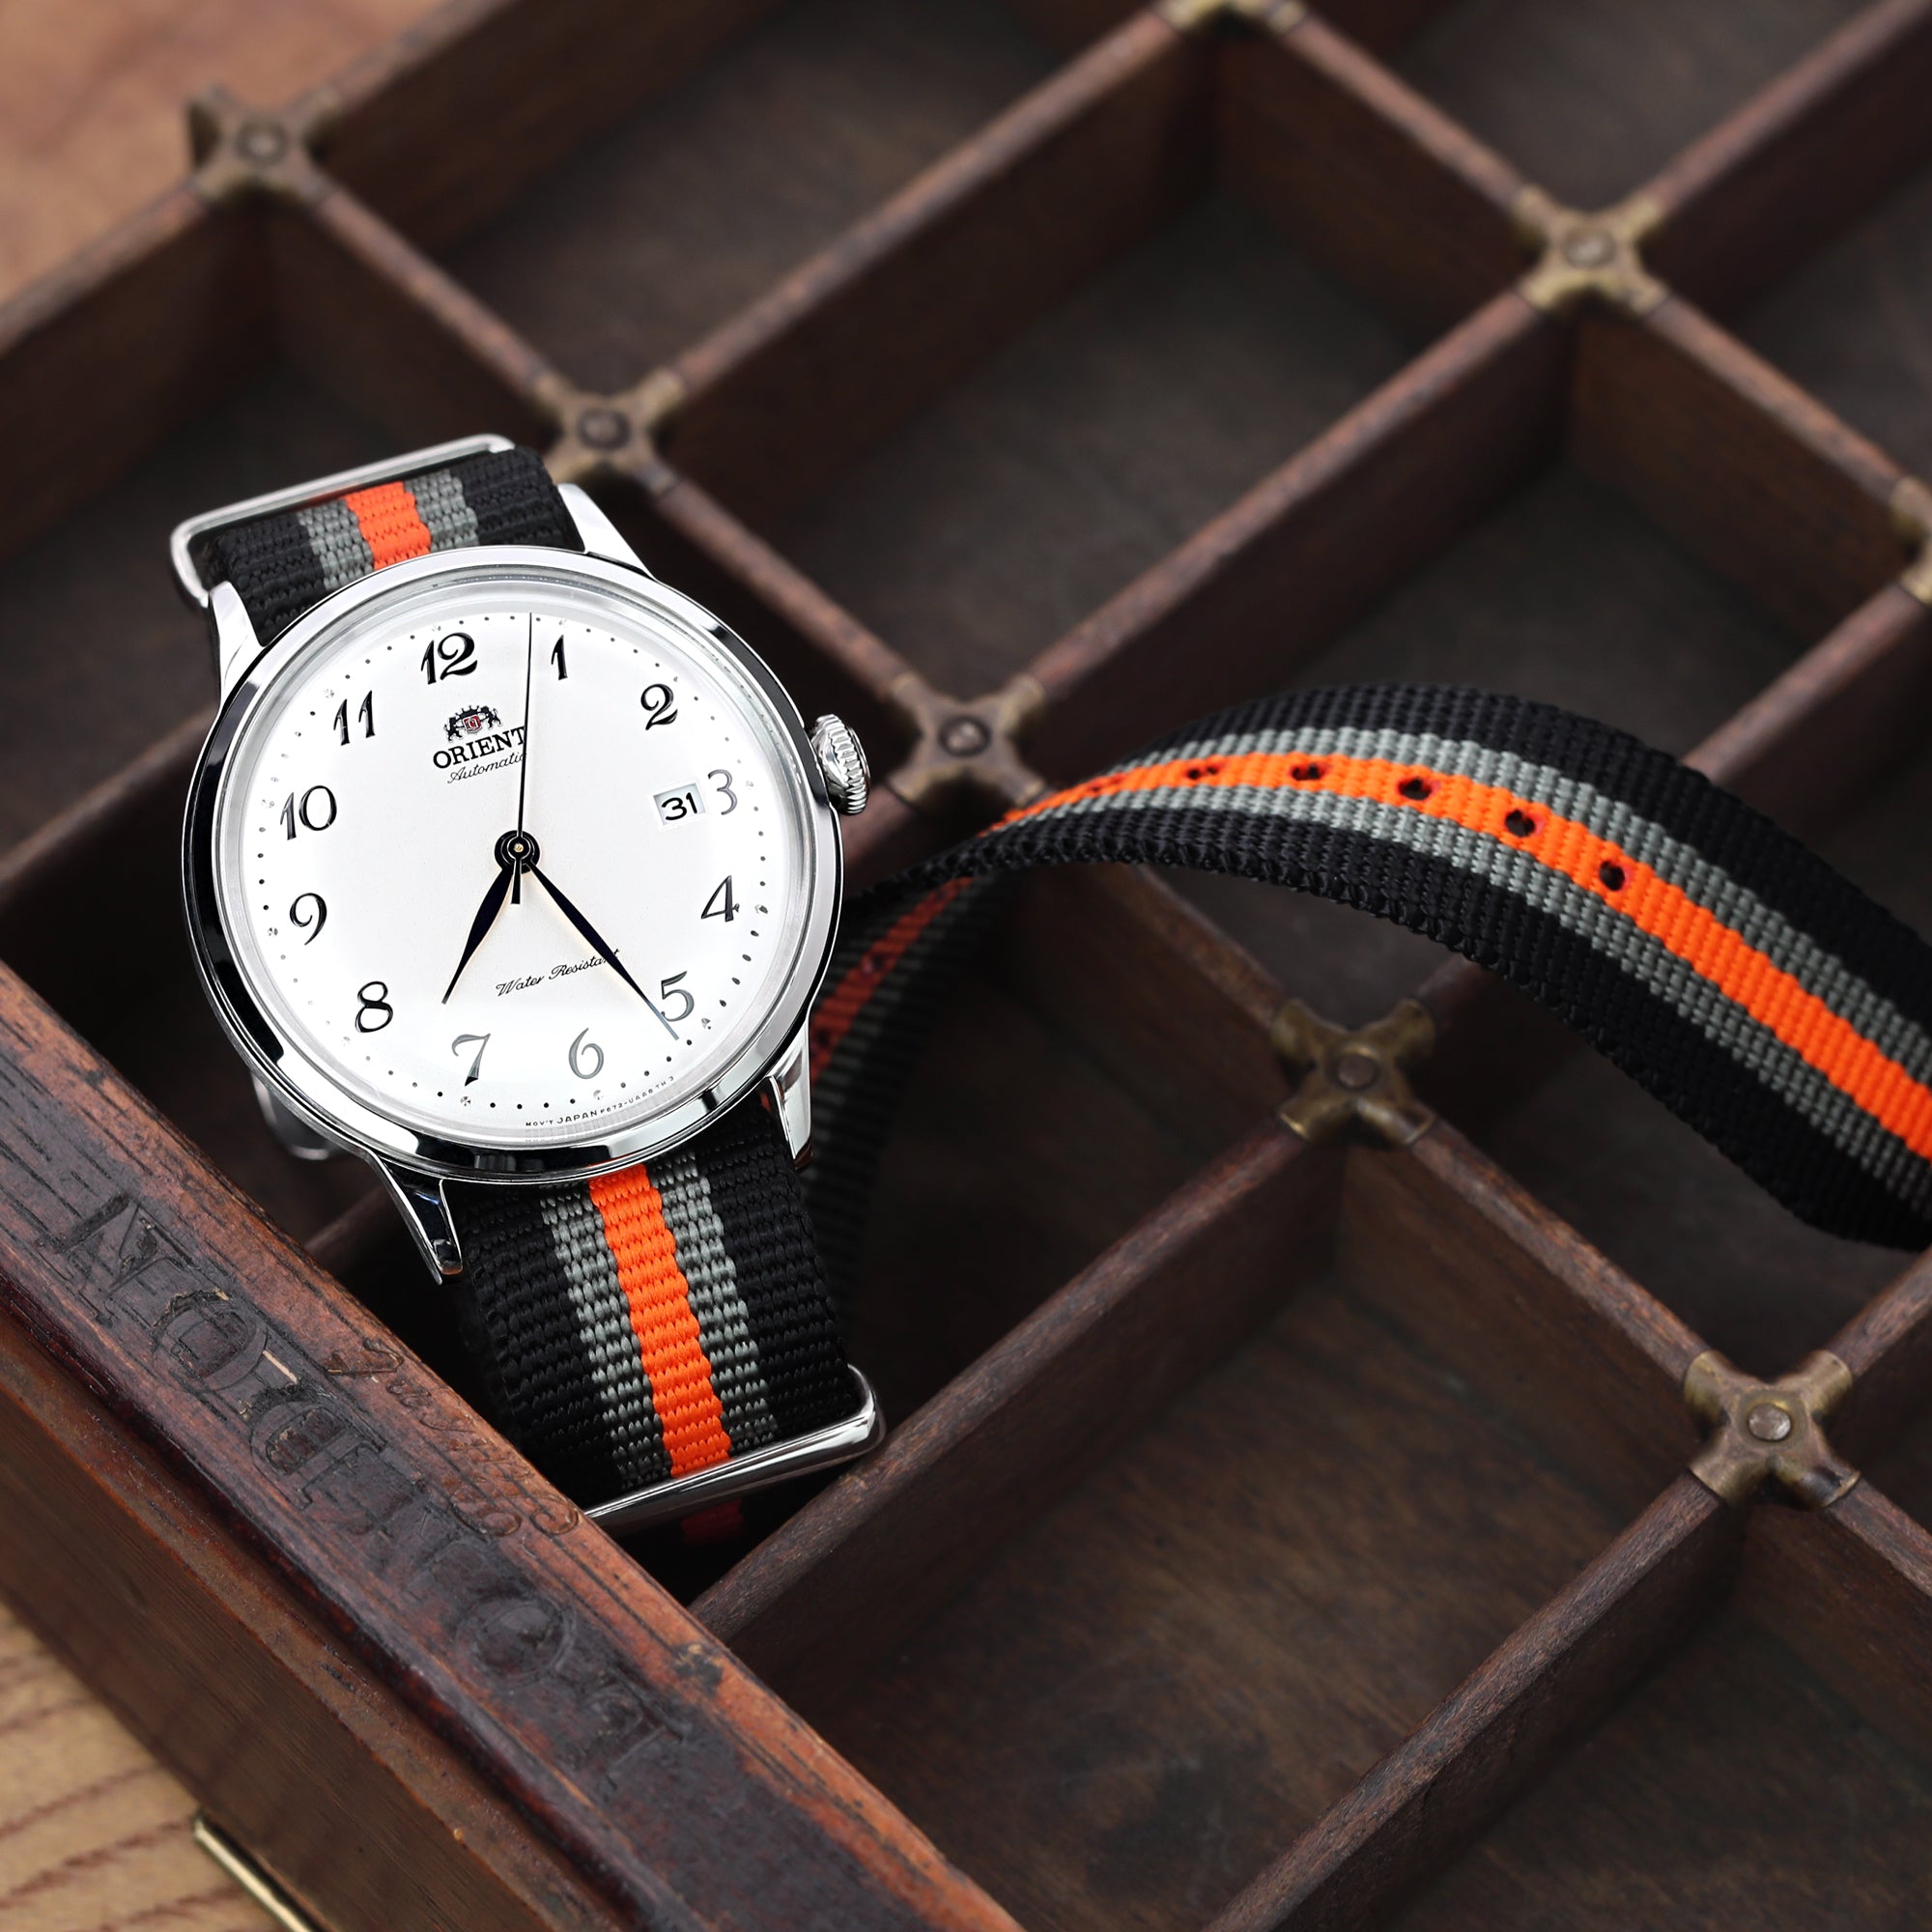 Watch Bands | The Complete Guide To Watch Bands & Straps For Gentleman's